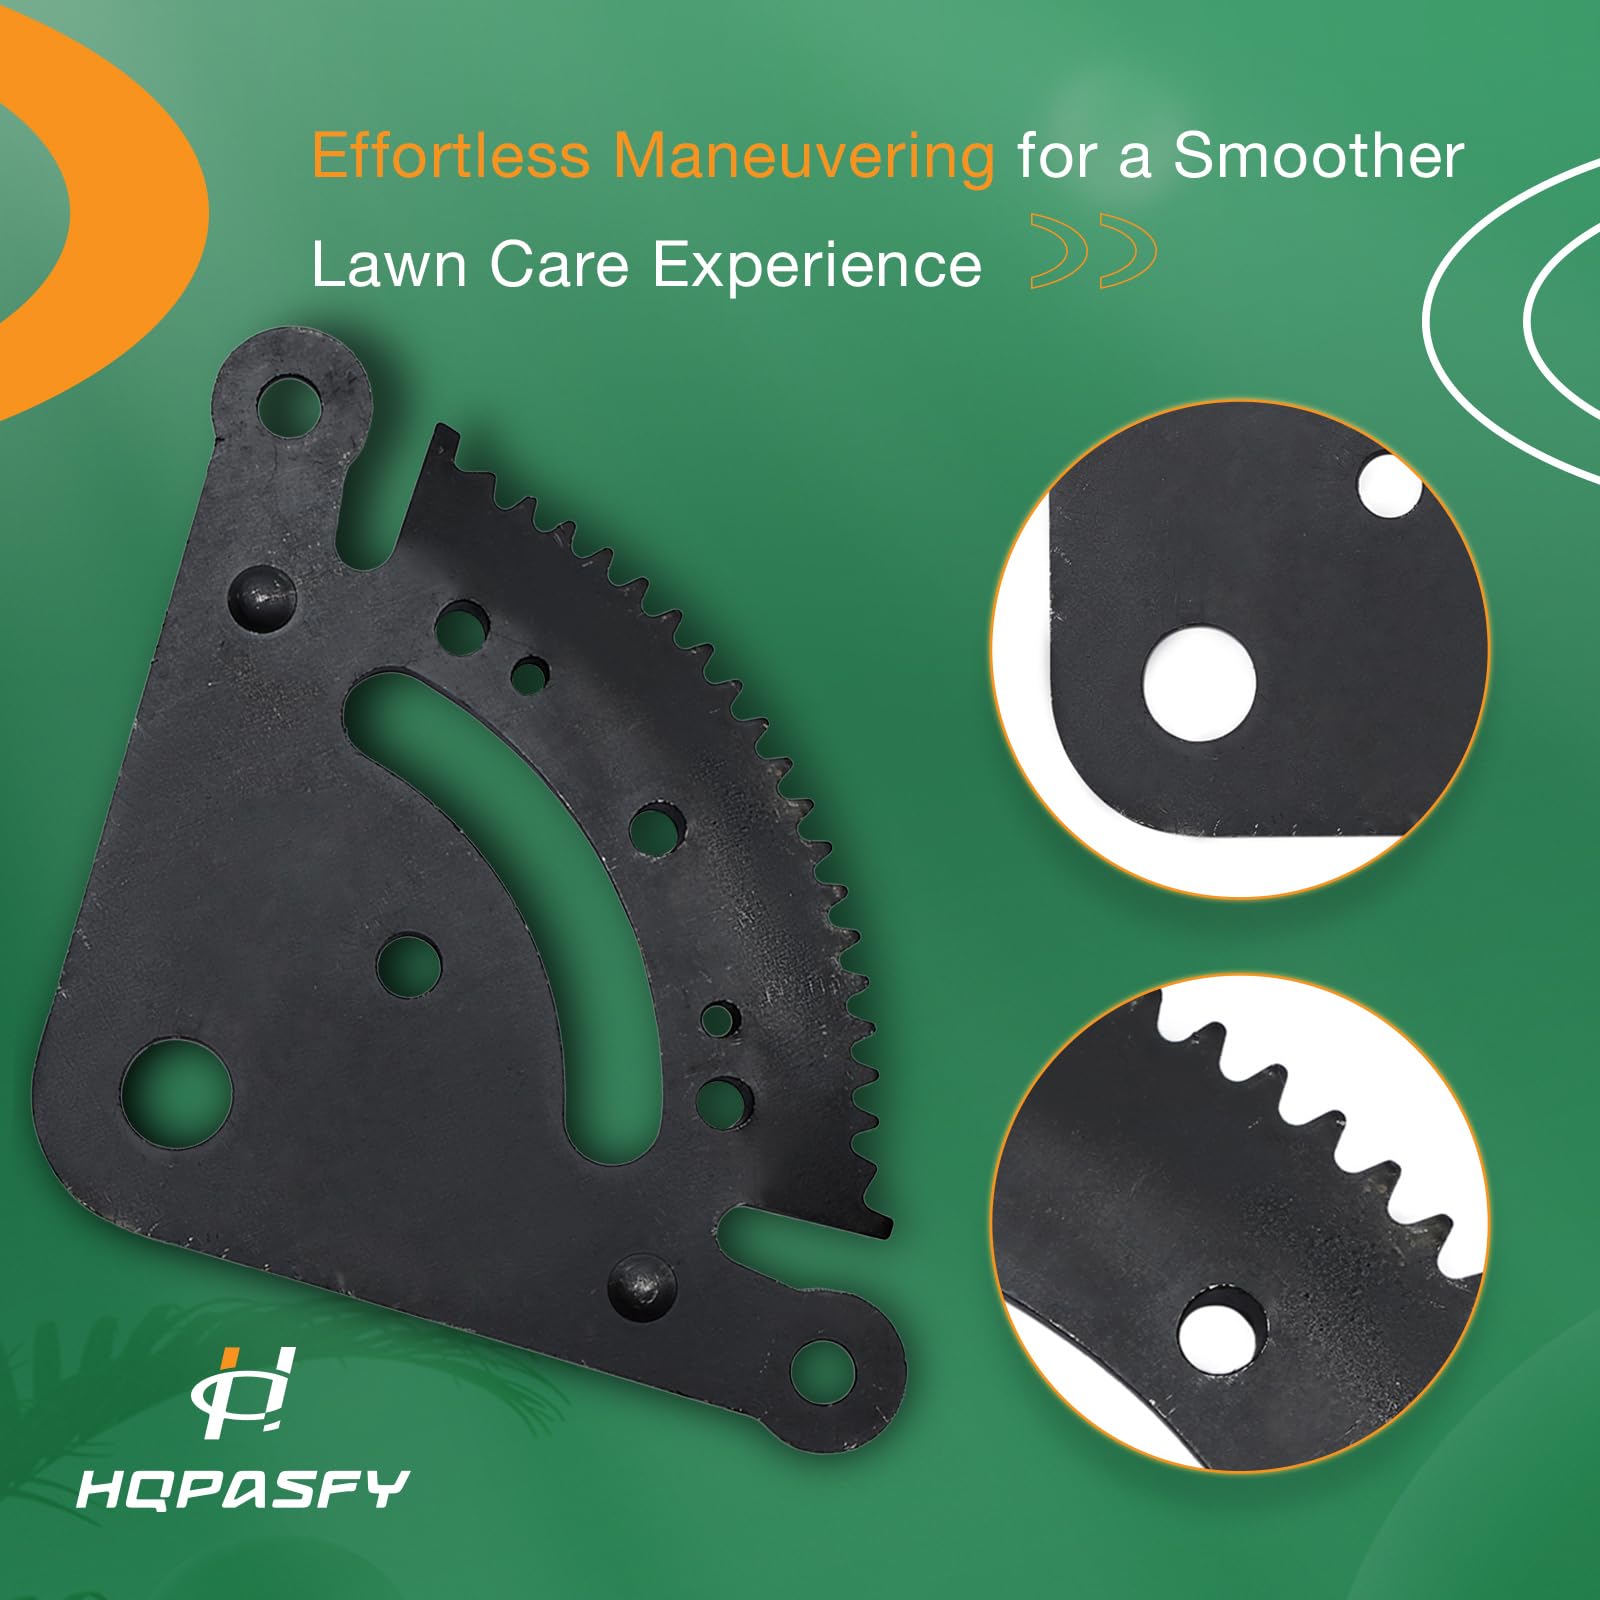 HQPASFY Steering Sector Pinion Gear Rebuild Kit Compatible with John Deere LA Series Lawn Tractors Replaces# GX21924BLE, GX20053, GX20054, GX21994